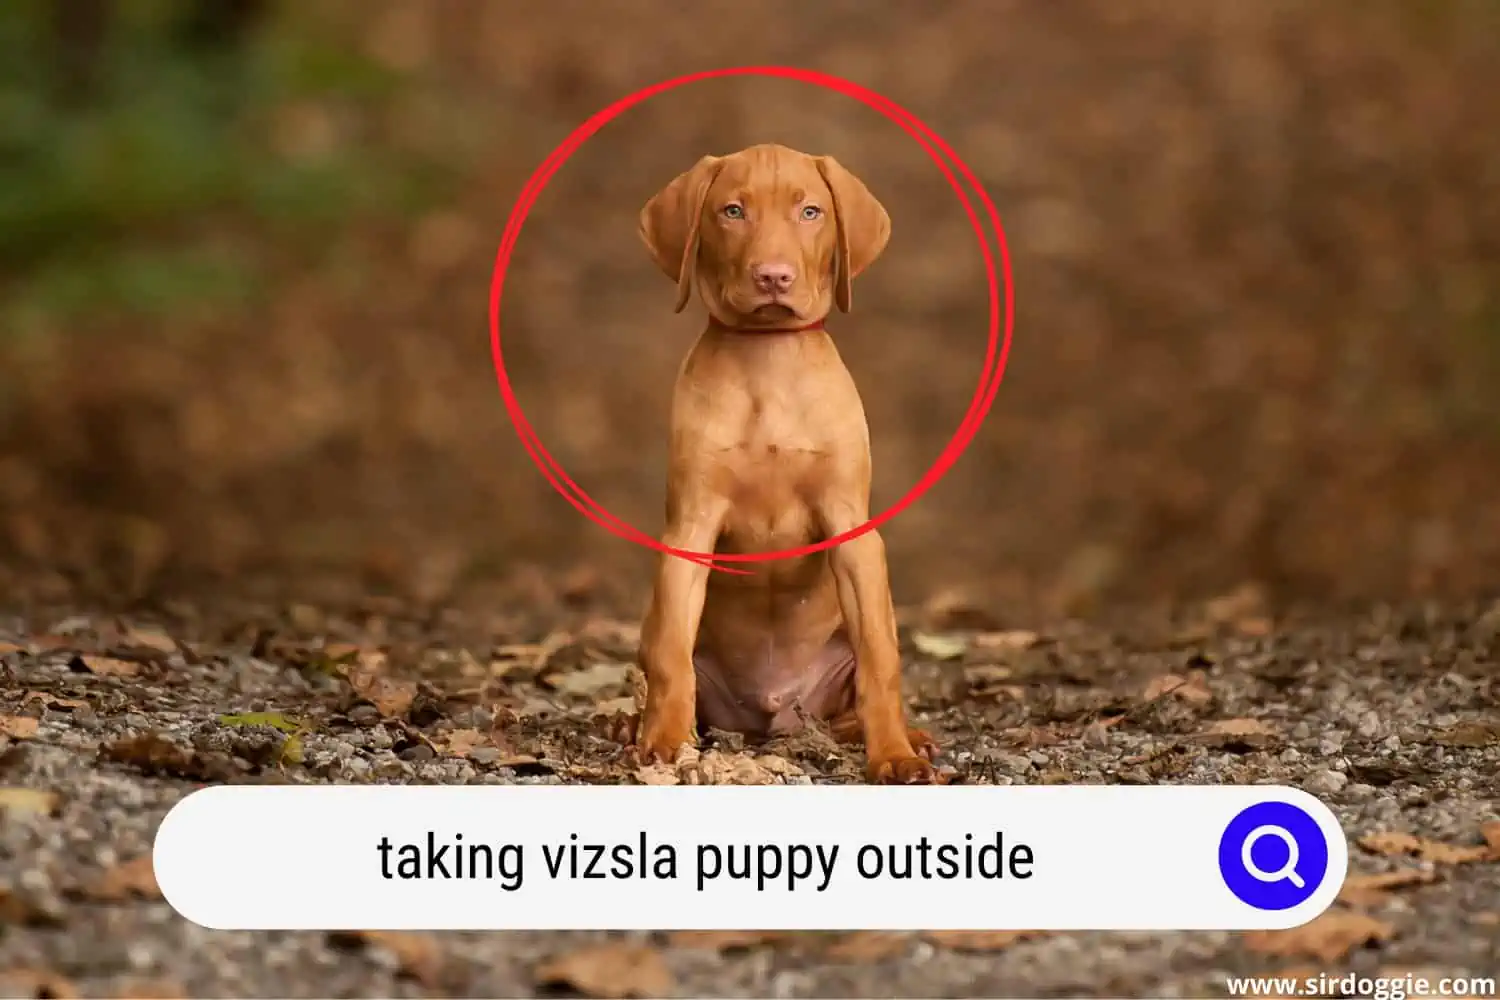 A photo of Vizsla puppy sitting at the center with blurred background